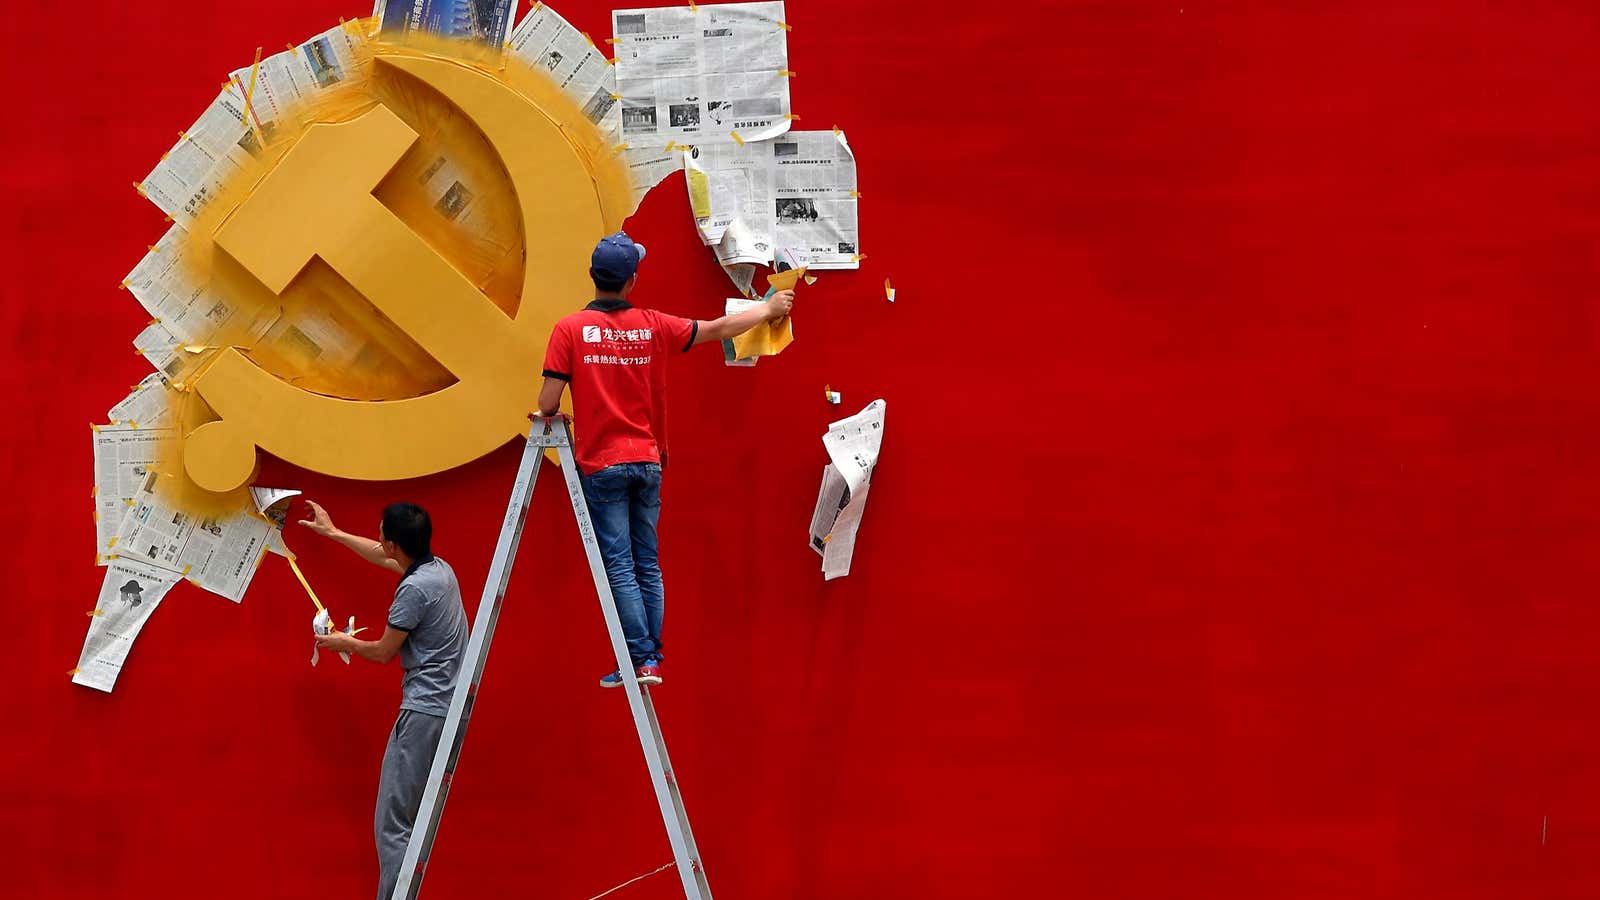 China’s communist ideology may need more than a new paint job.